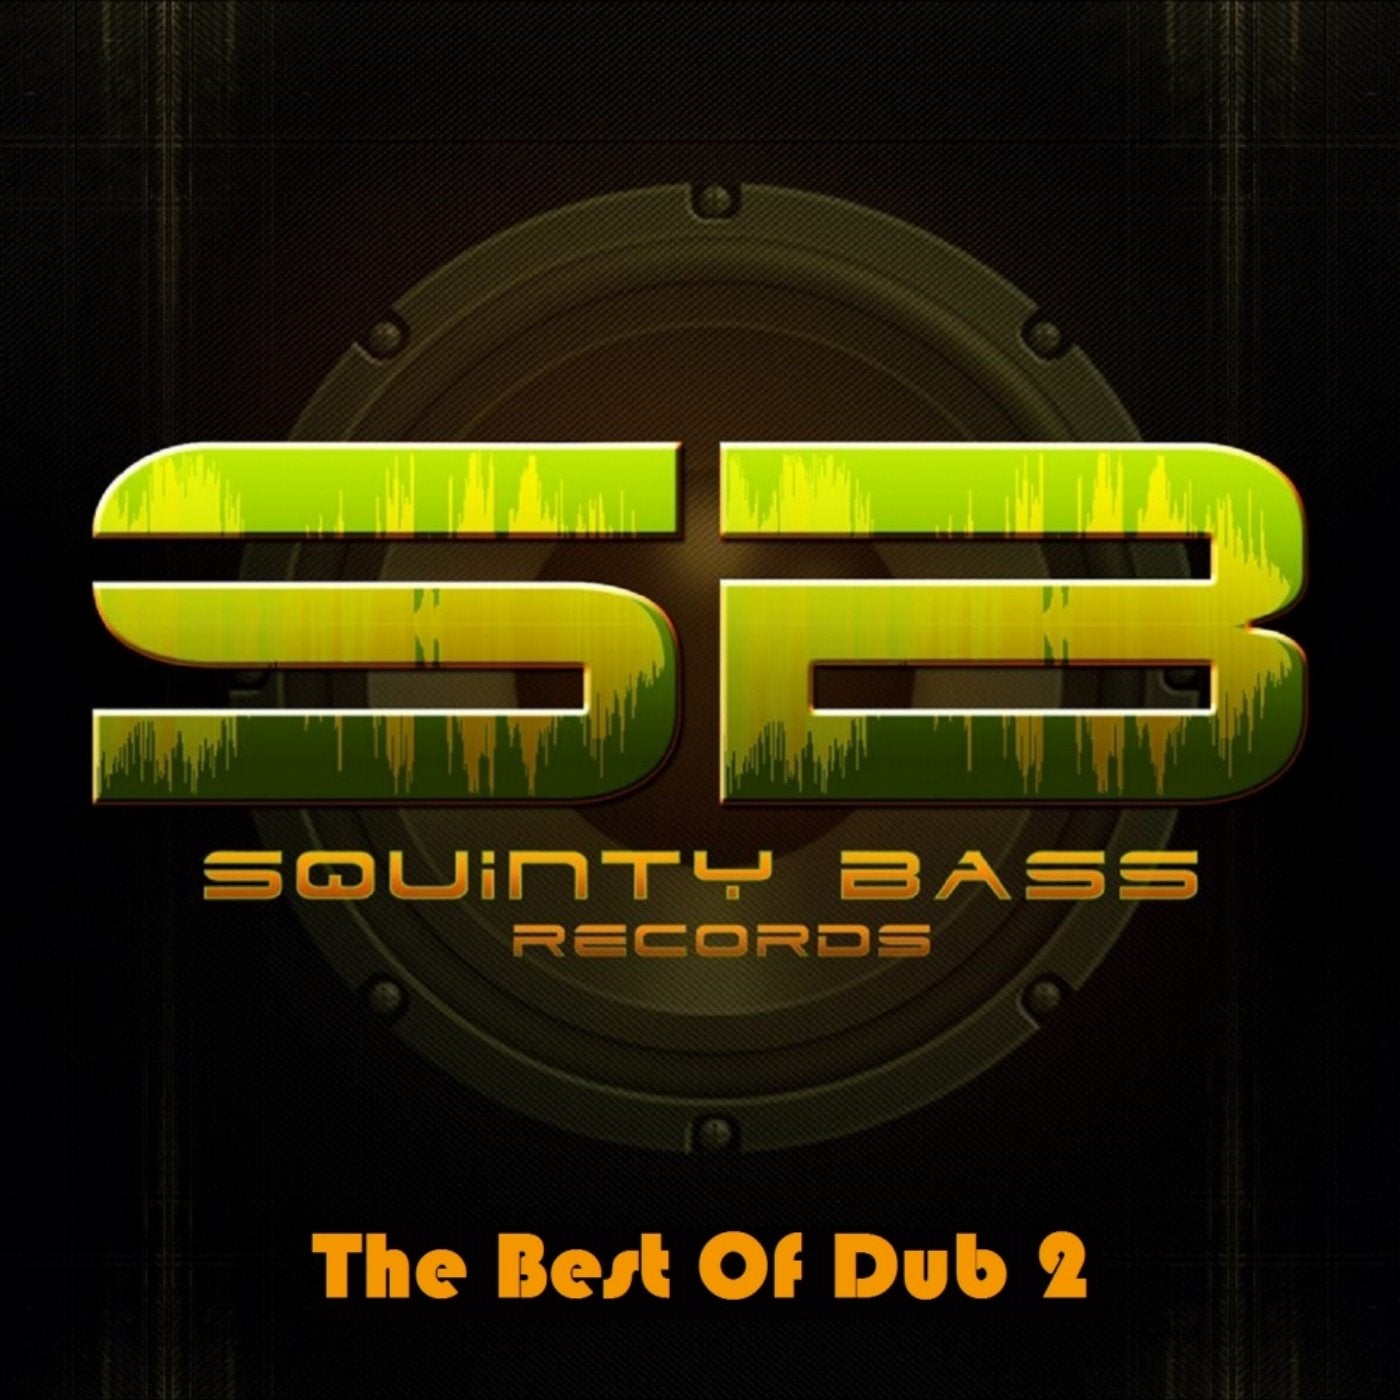 The Best Of Dub 2